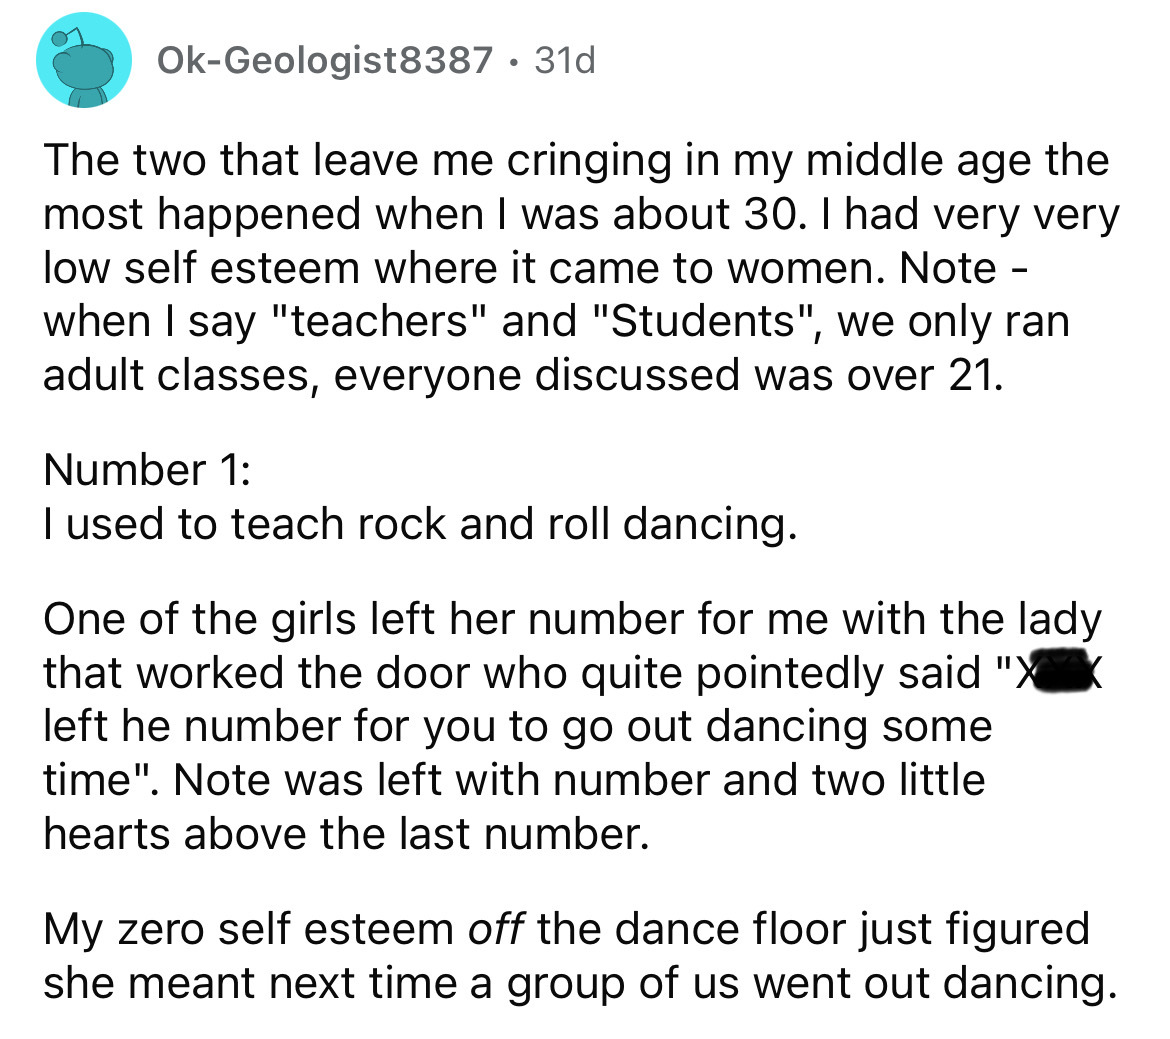 number - OkGeologist8387 31d The two that leave me cringing in my middle age the most happened when I was about 30. I had very very low self esteem where it came to women. Note when I say "teachers" and "Students", we only ran adult classes, everyone disc